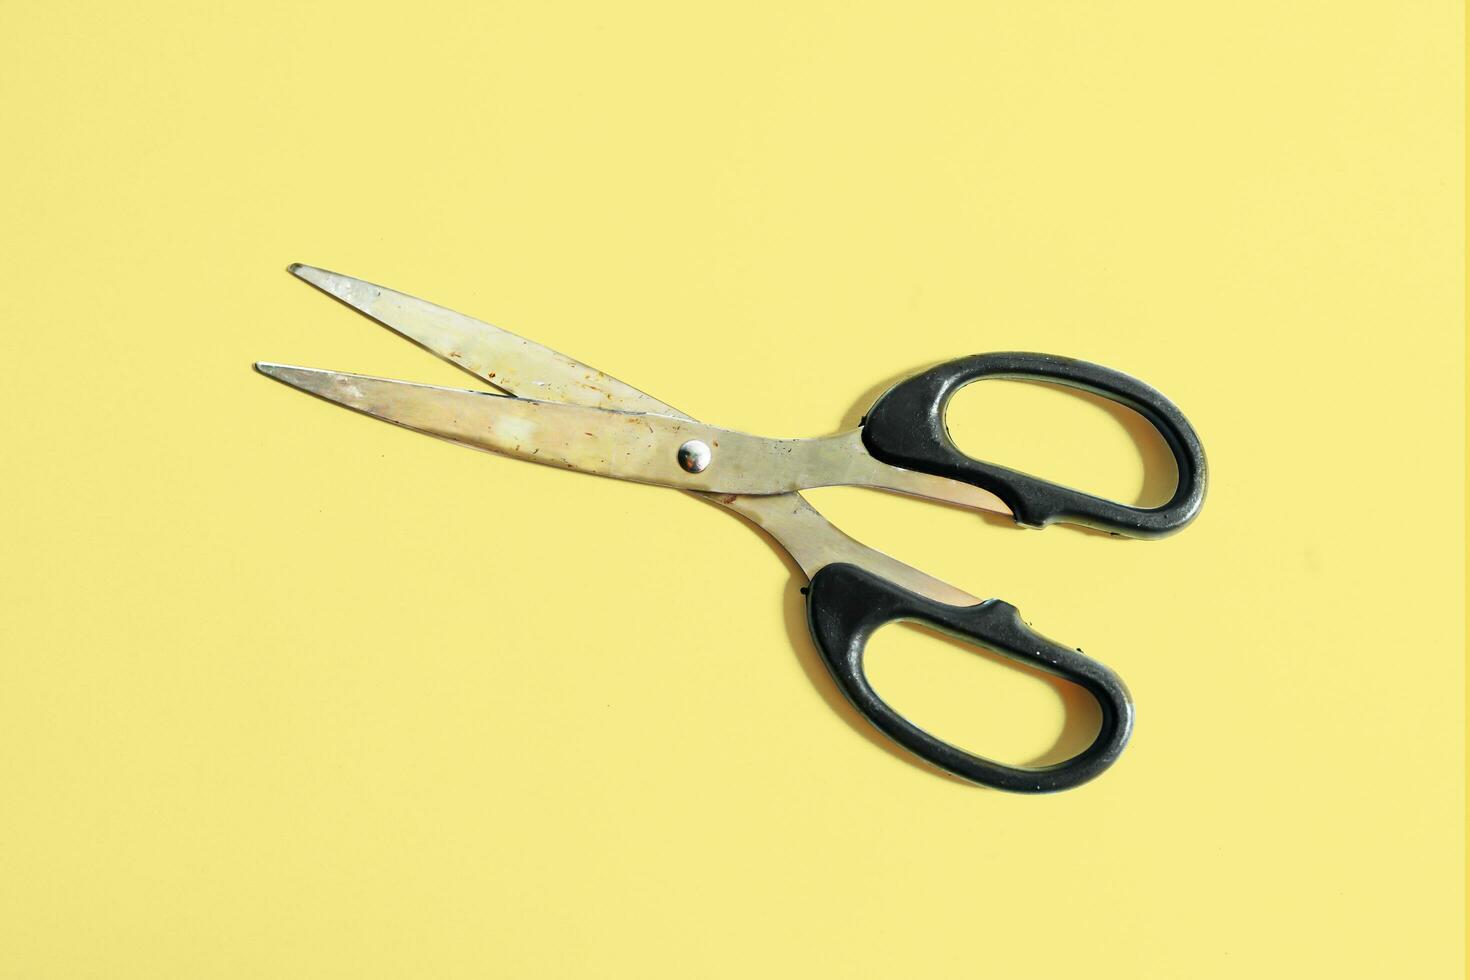 Stylish Professional Barber Scissors, Cutting Hair on a yellow background photo